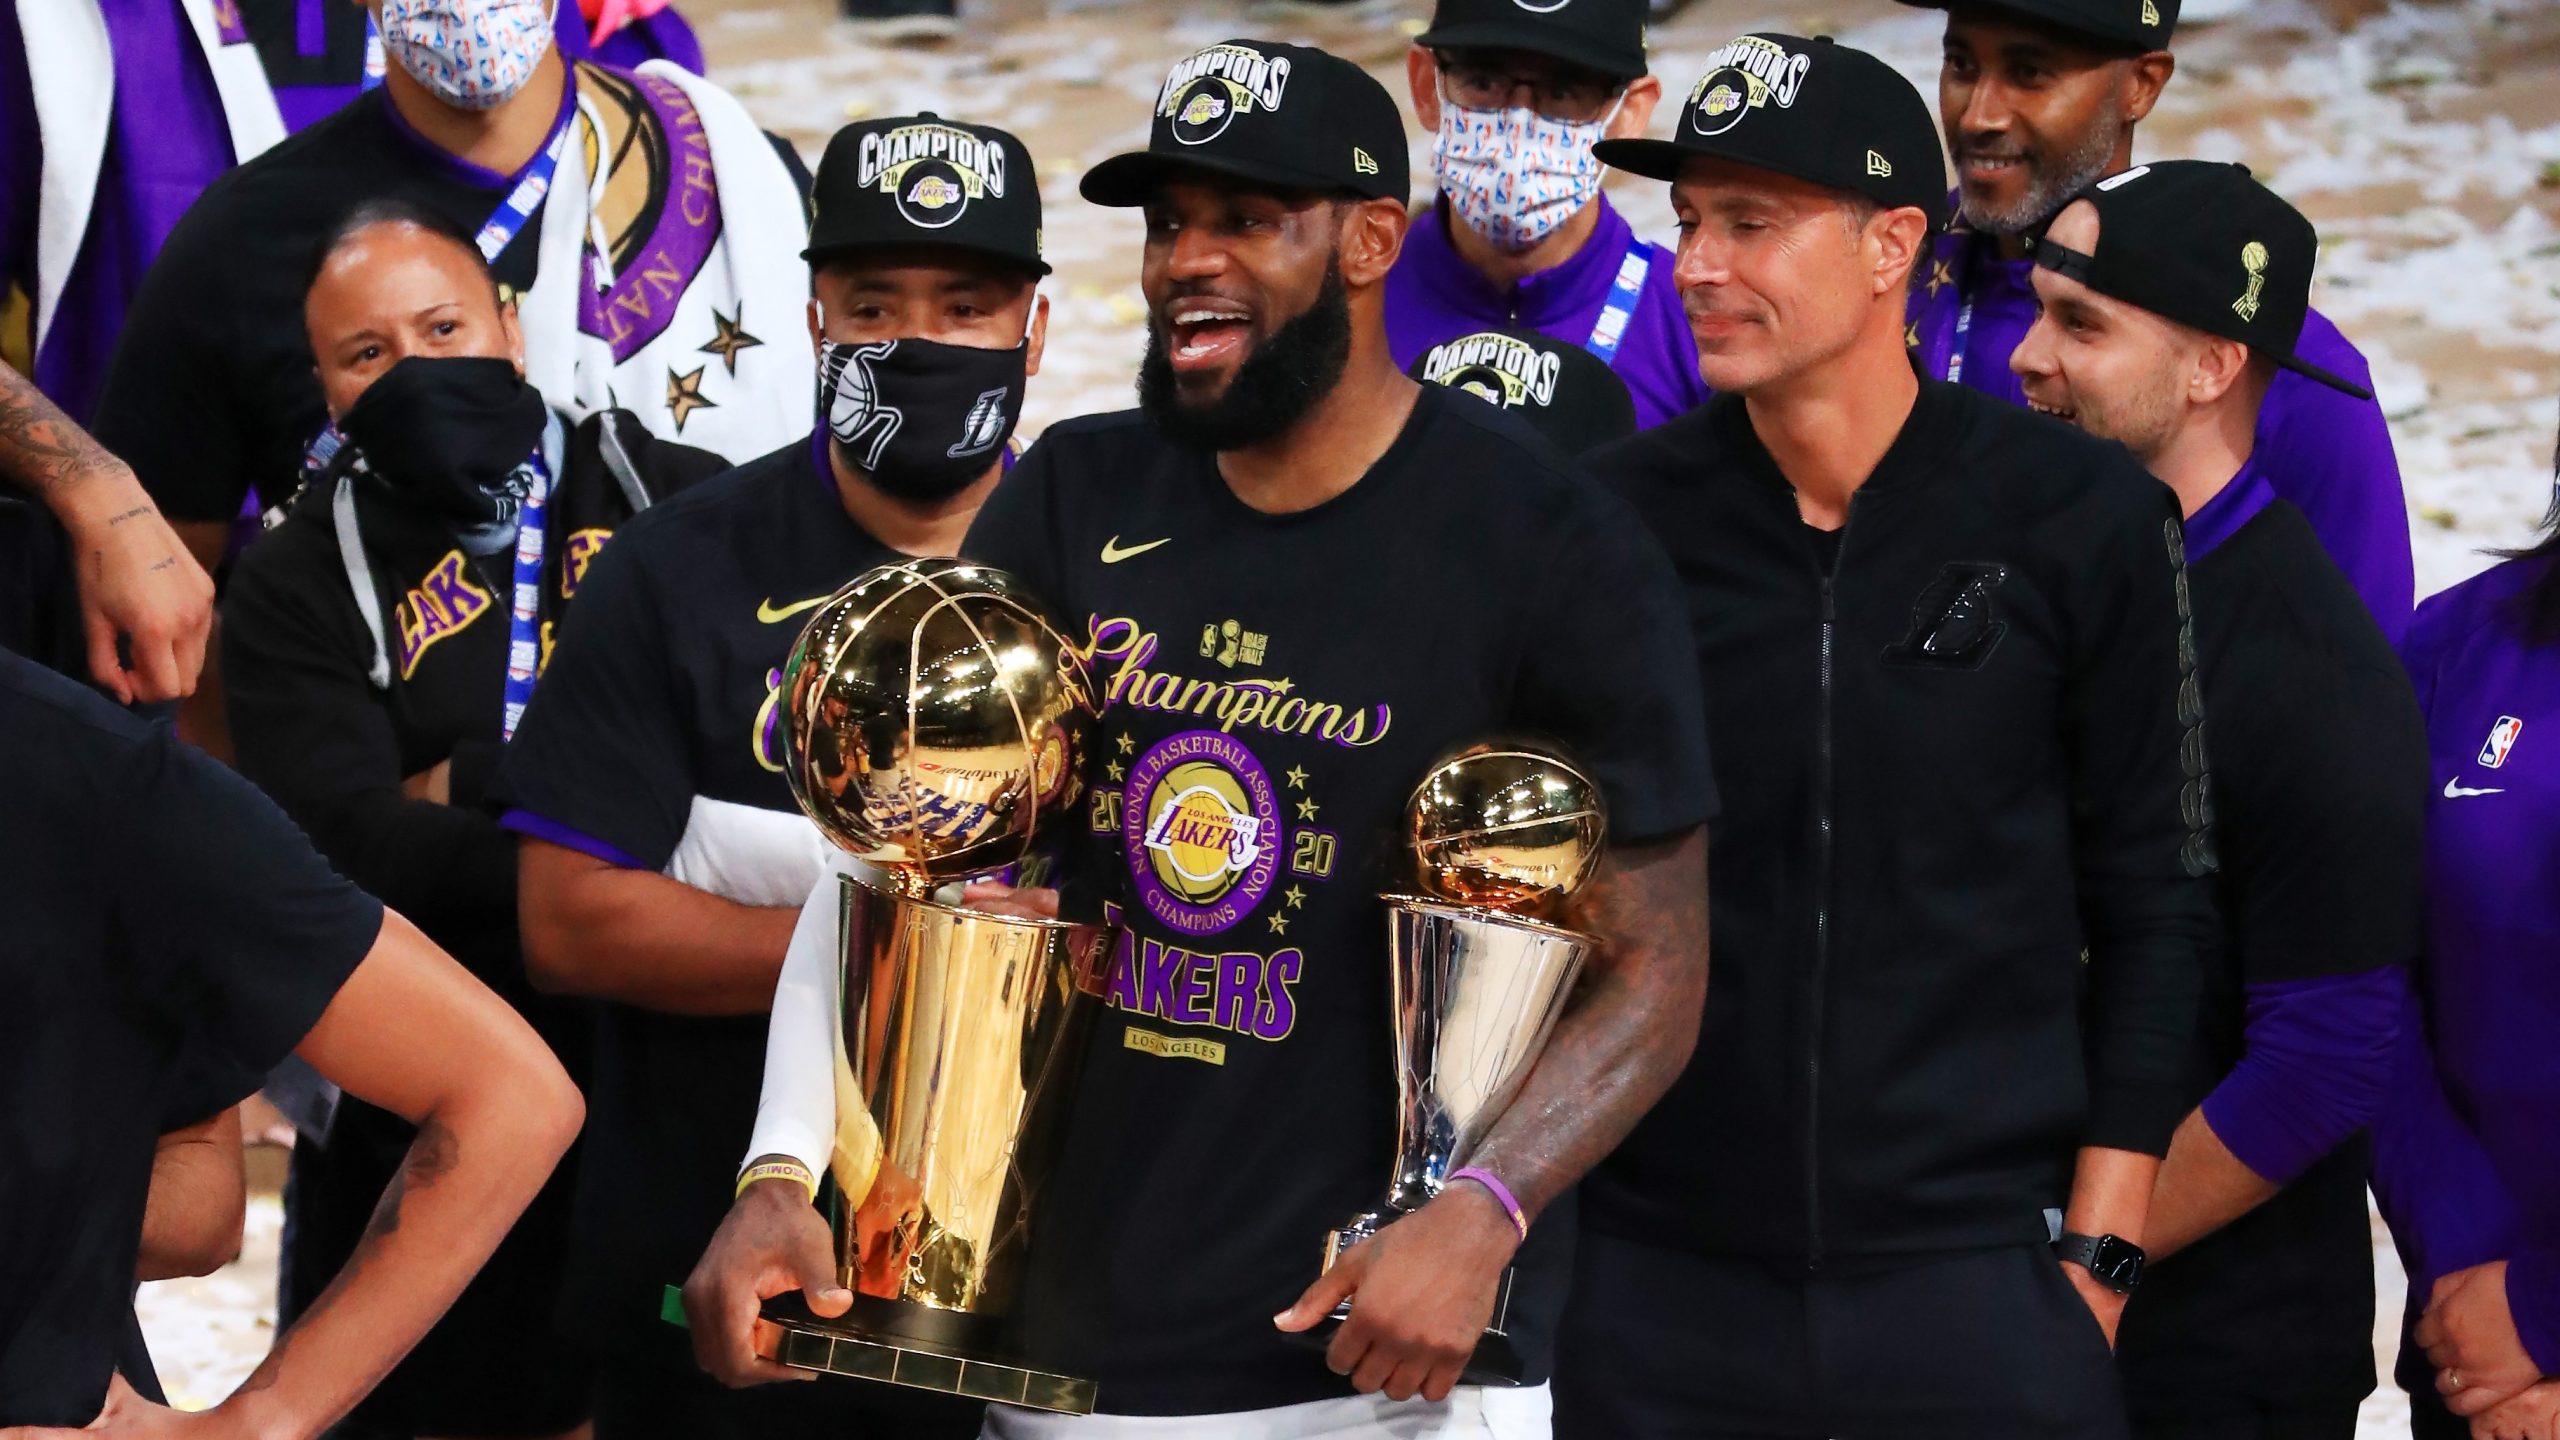 NBA Finals: Lakers trounce Heat 106-93 in Game 6 to win 17th NBA championship - THE SPORTS ROOM